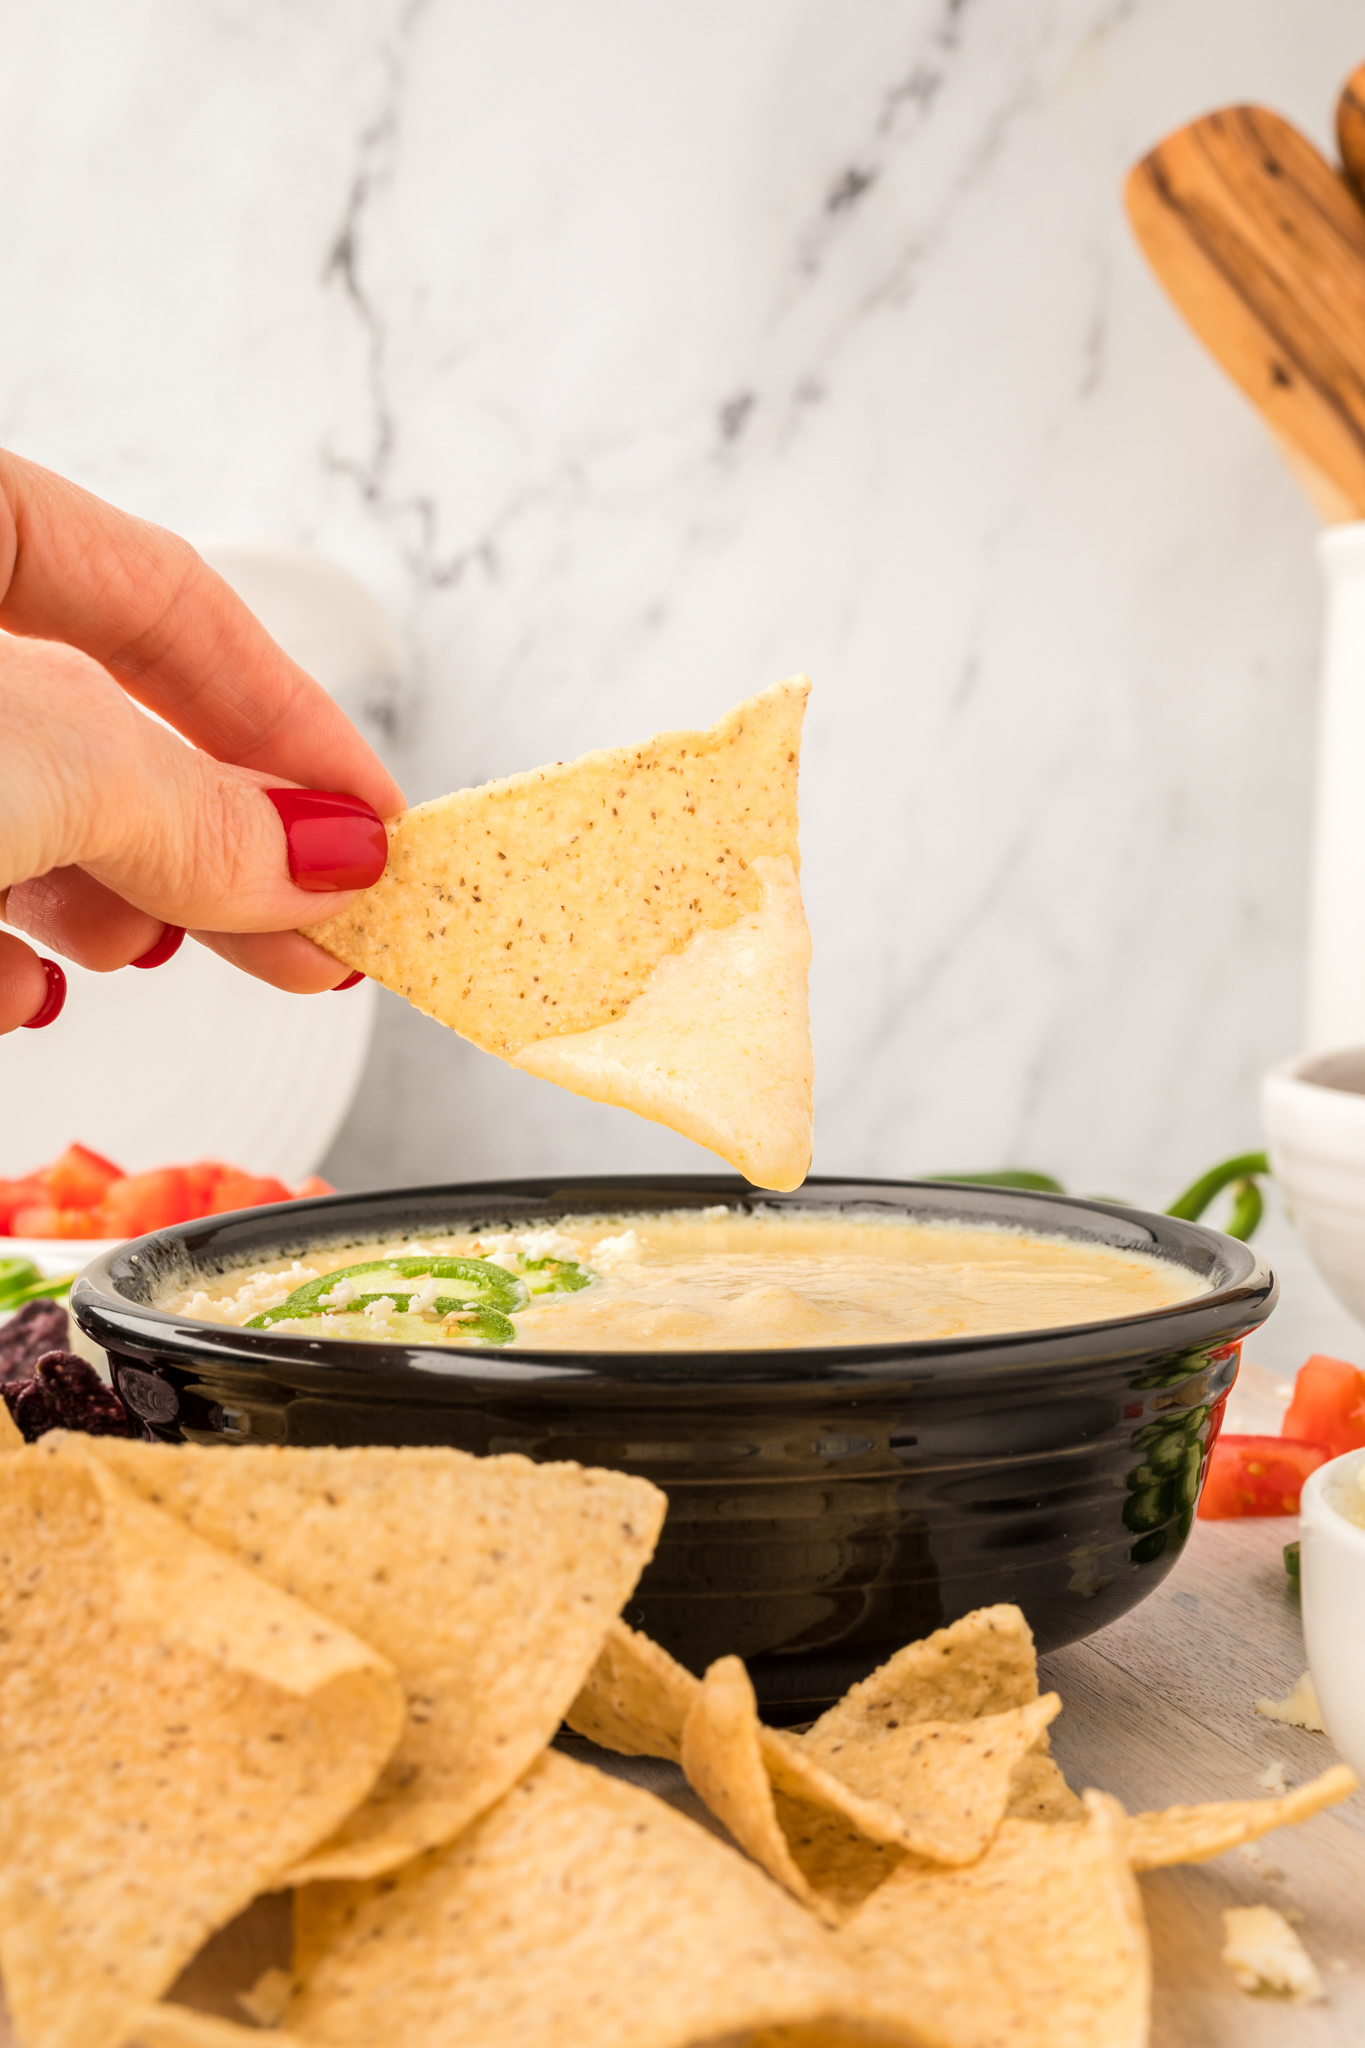 A photo of a tortilla chip being dipped into queso dip